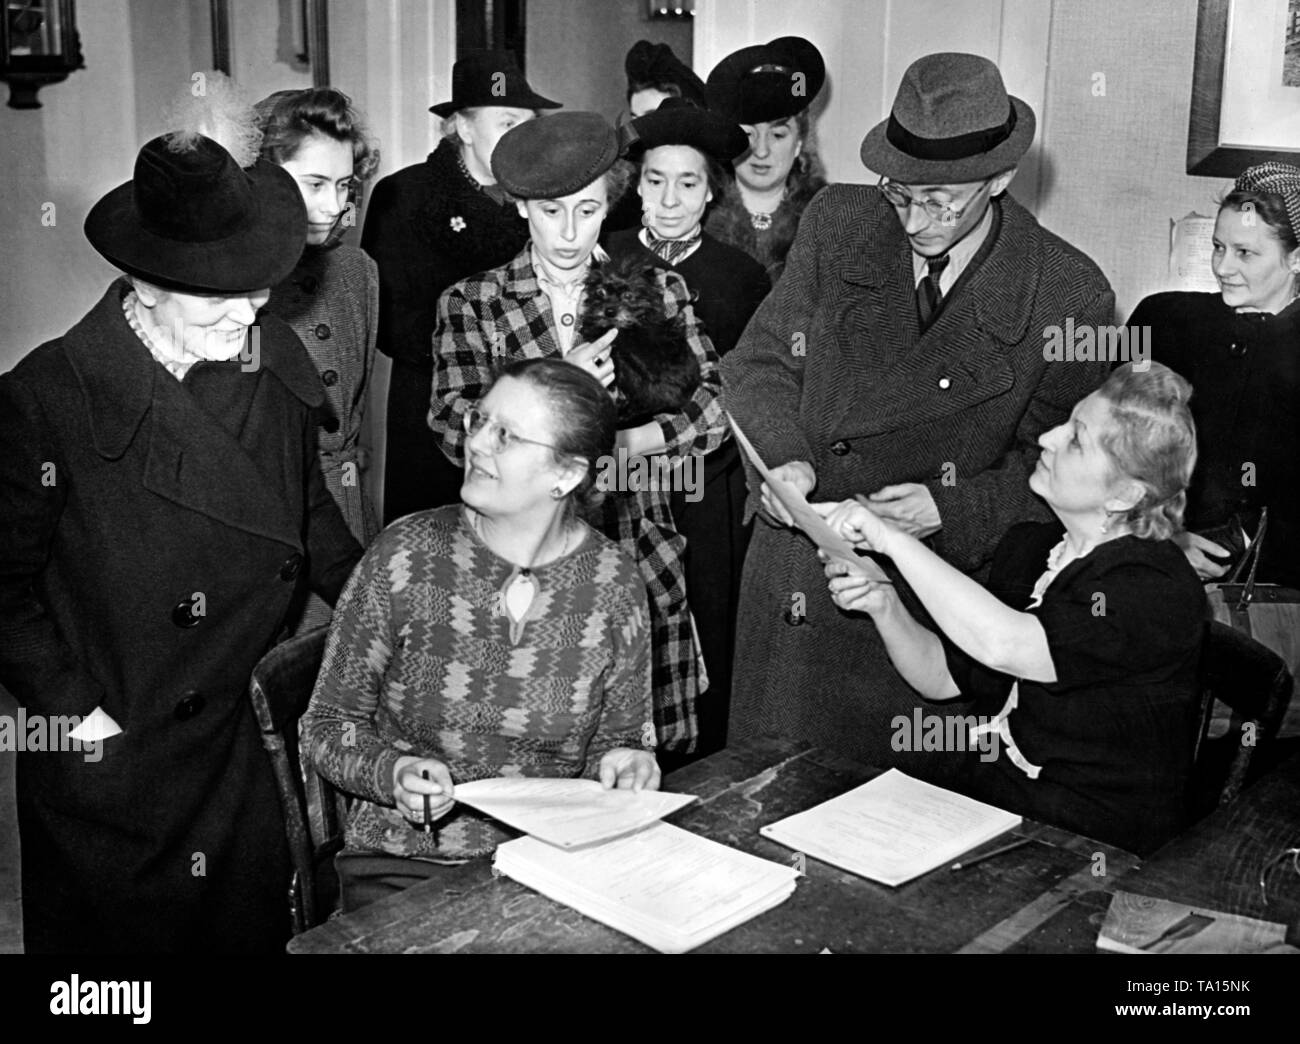 Issue of registration forms for the Arbeitseinsatz (labour deployment) of men and women in an office in Berlin. In accordance with the order of the General Plenipotentiary for Labour Deployment from 21.1.43. Photo: Schwan Stock Photo